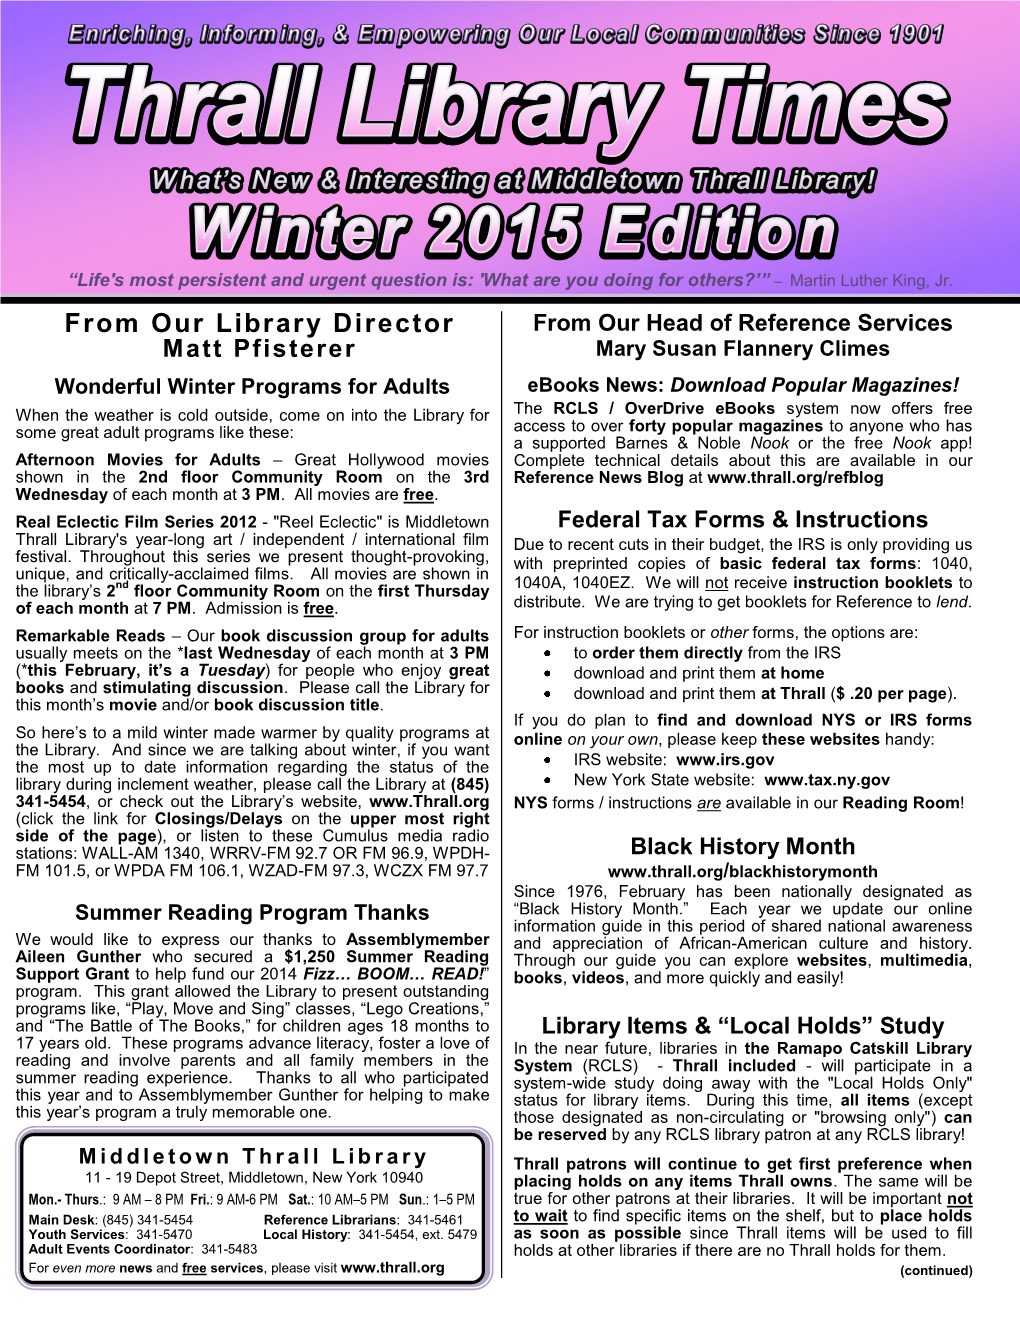 Winter 2015 Edition of Our Newsletter